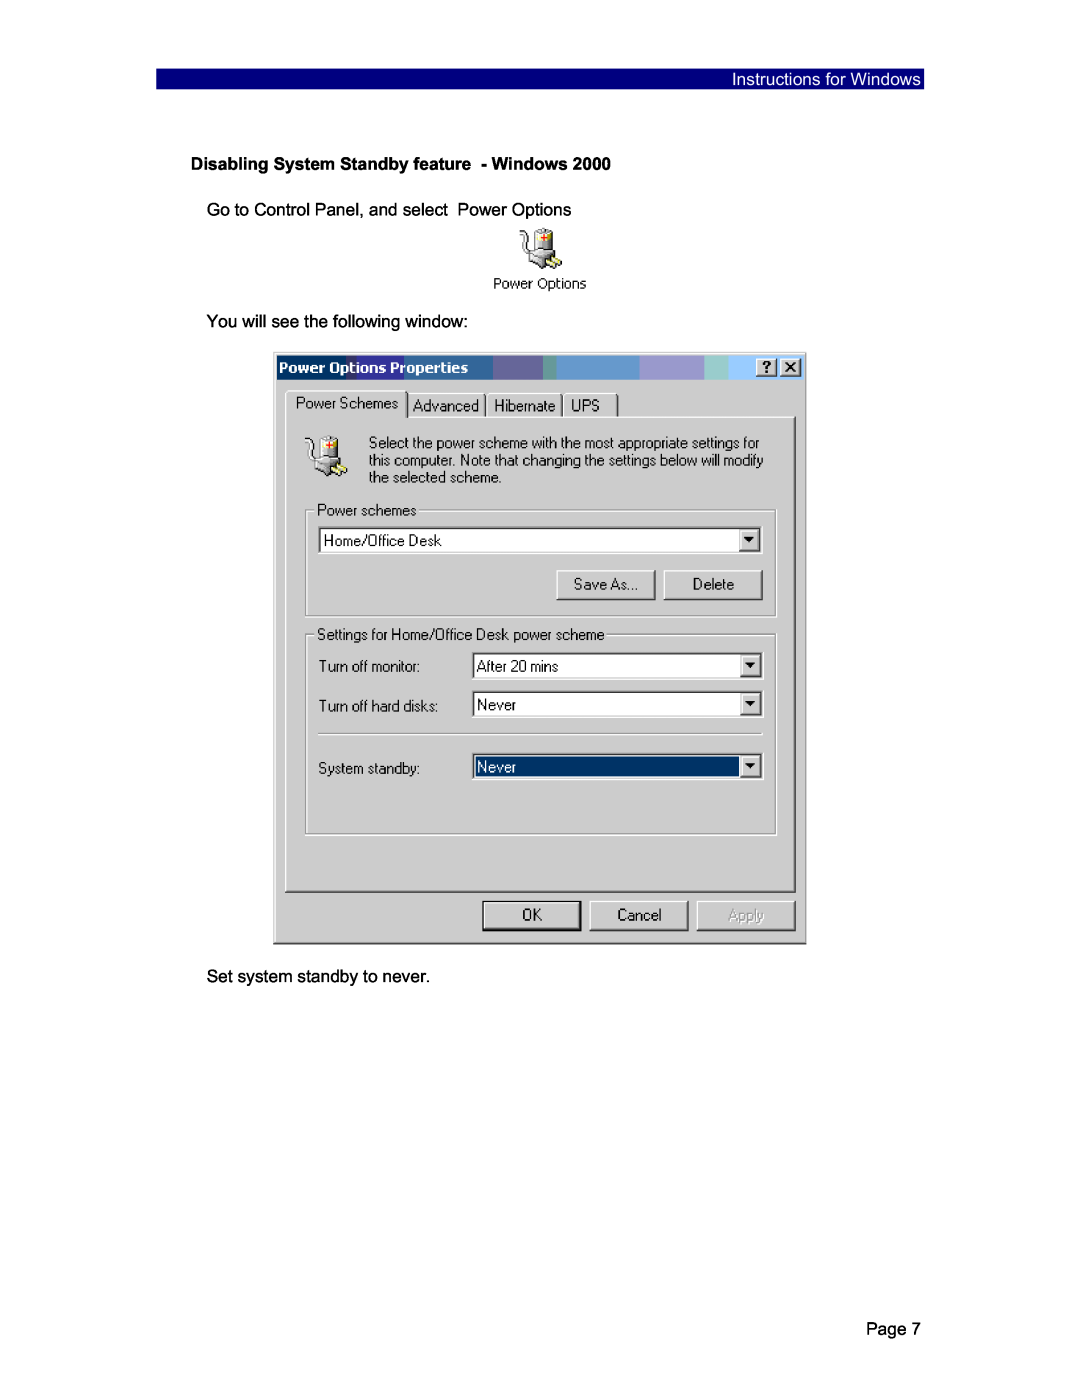 PowerFile C200S Instructions for Windows, Disabling System Standby feature - Windows, You will see the following window 